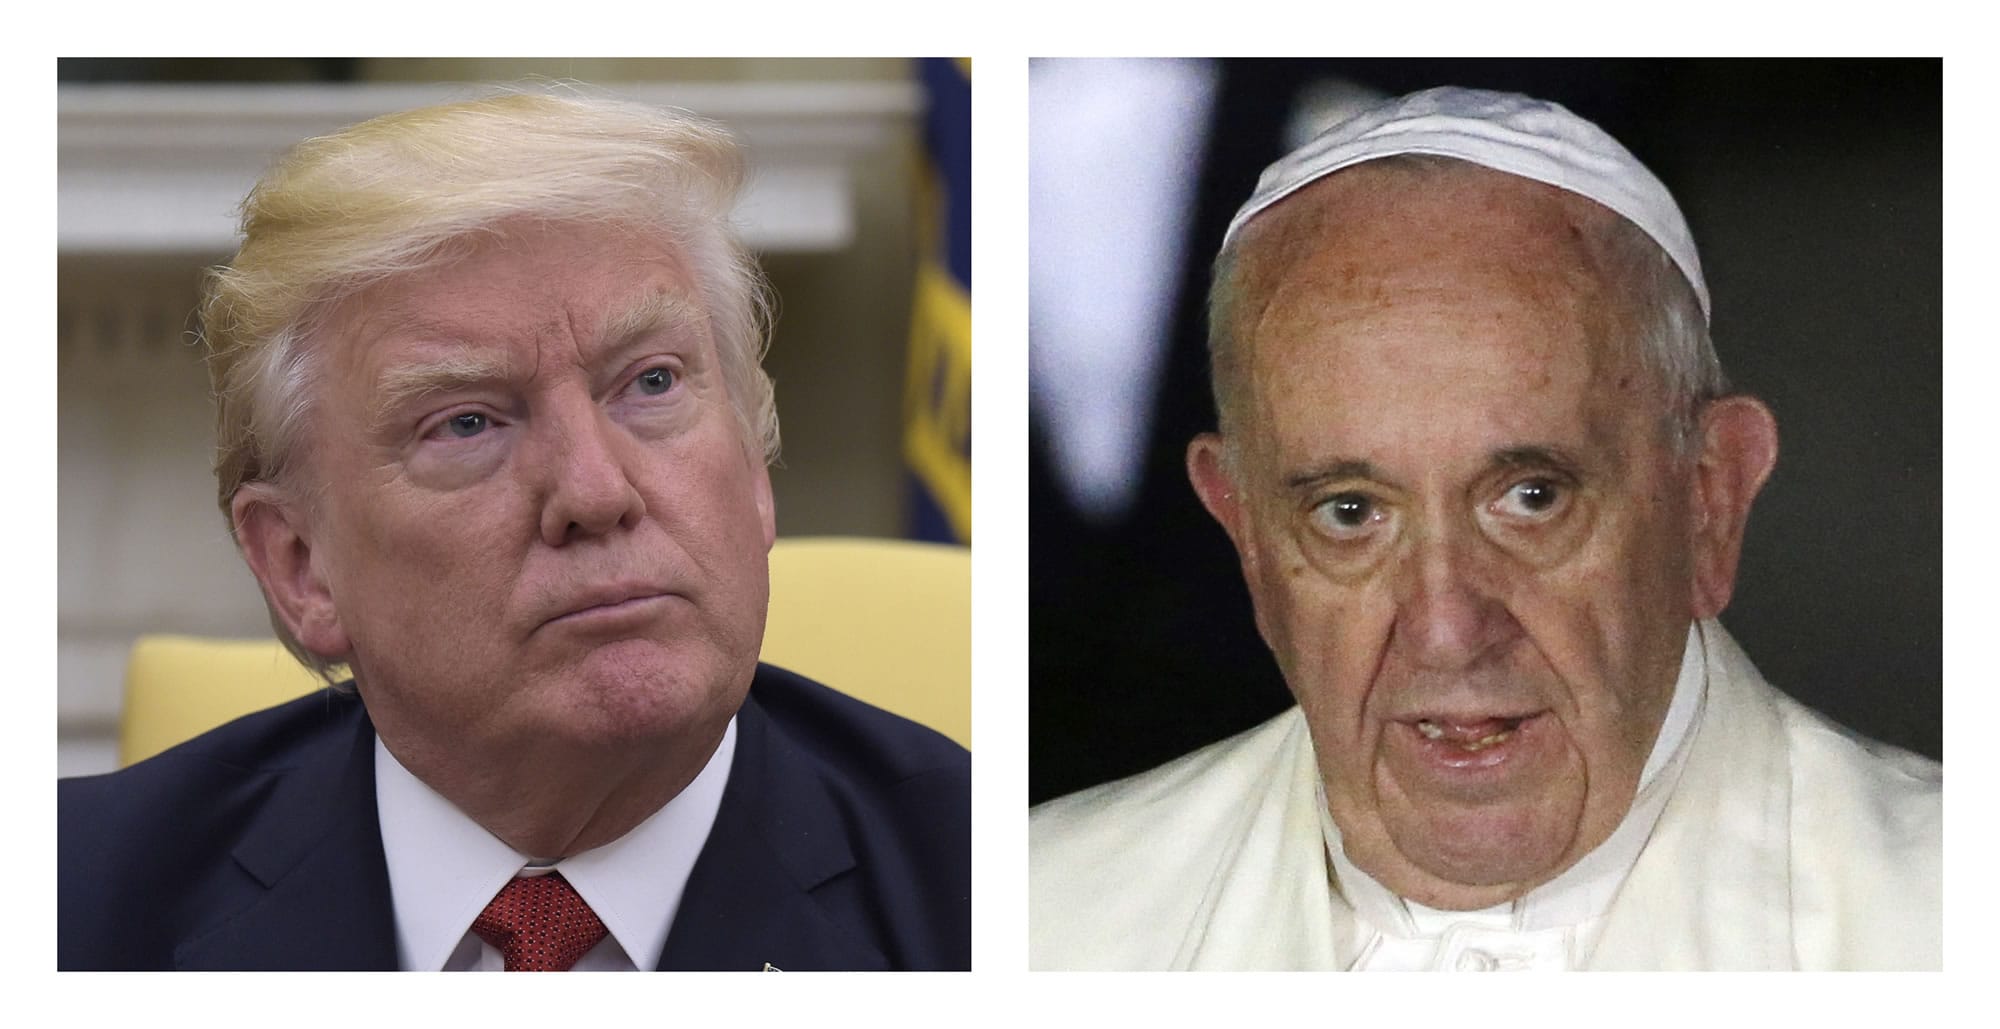 FILE - In this combo of file photos, President Donald Trump and Pope Francis. They are stylistic and strategic opposites, one a bombastic and ostentatious president, the other a modest though worldly wise pontiff. They disagree on global issues ranging from immigration to climate change.